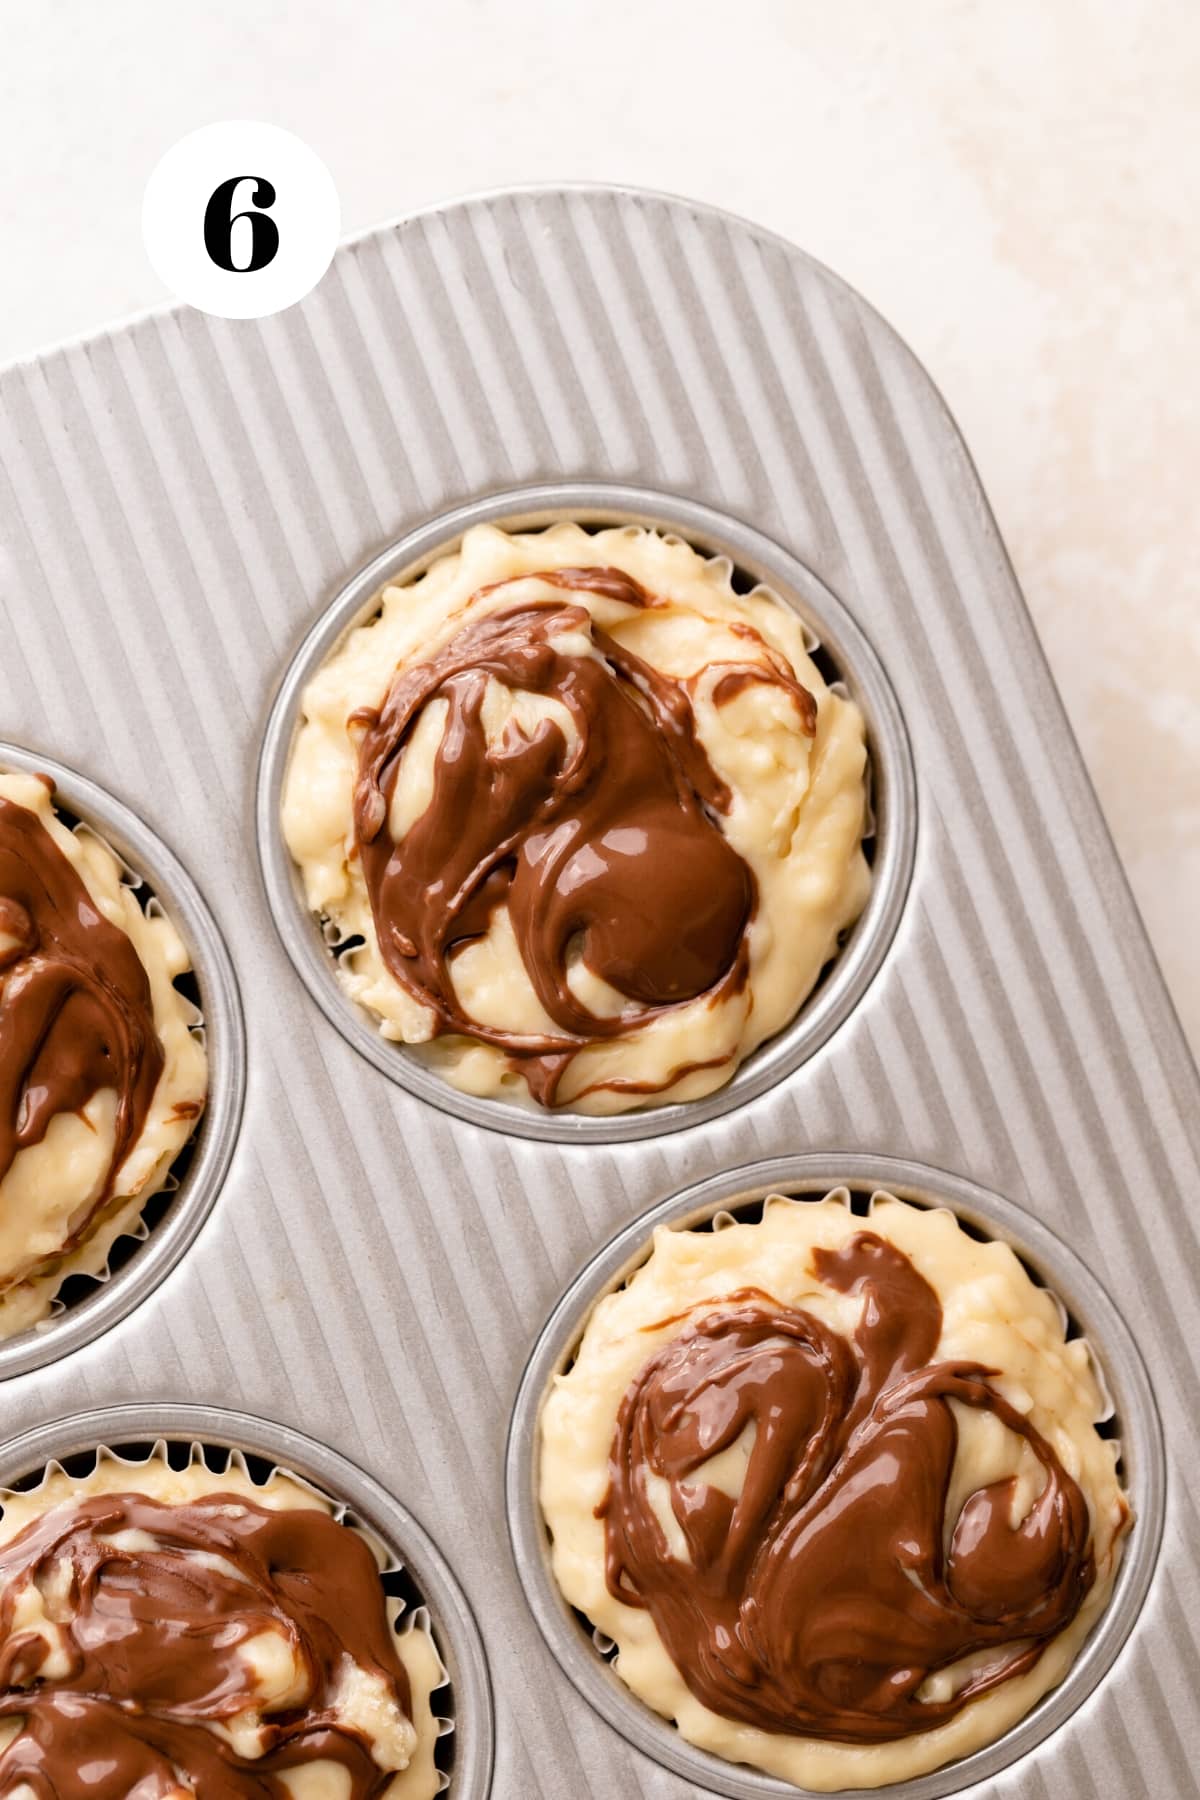 banana muffins with a swirl of nutella on top before baking.